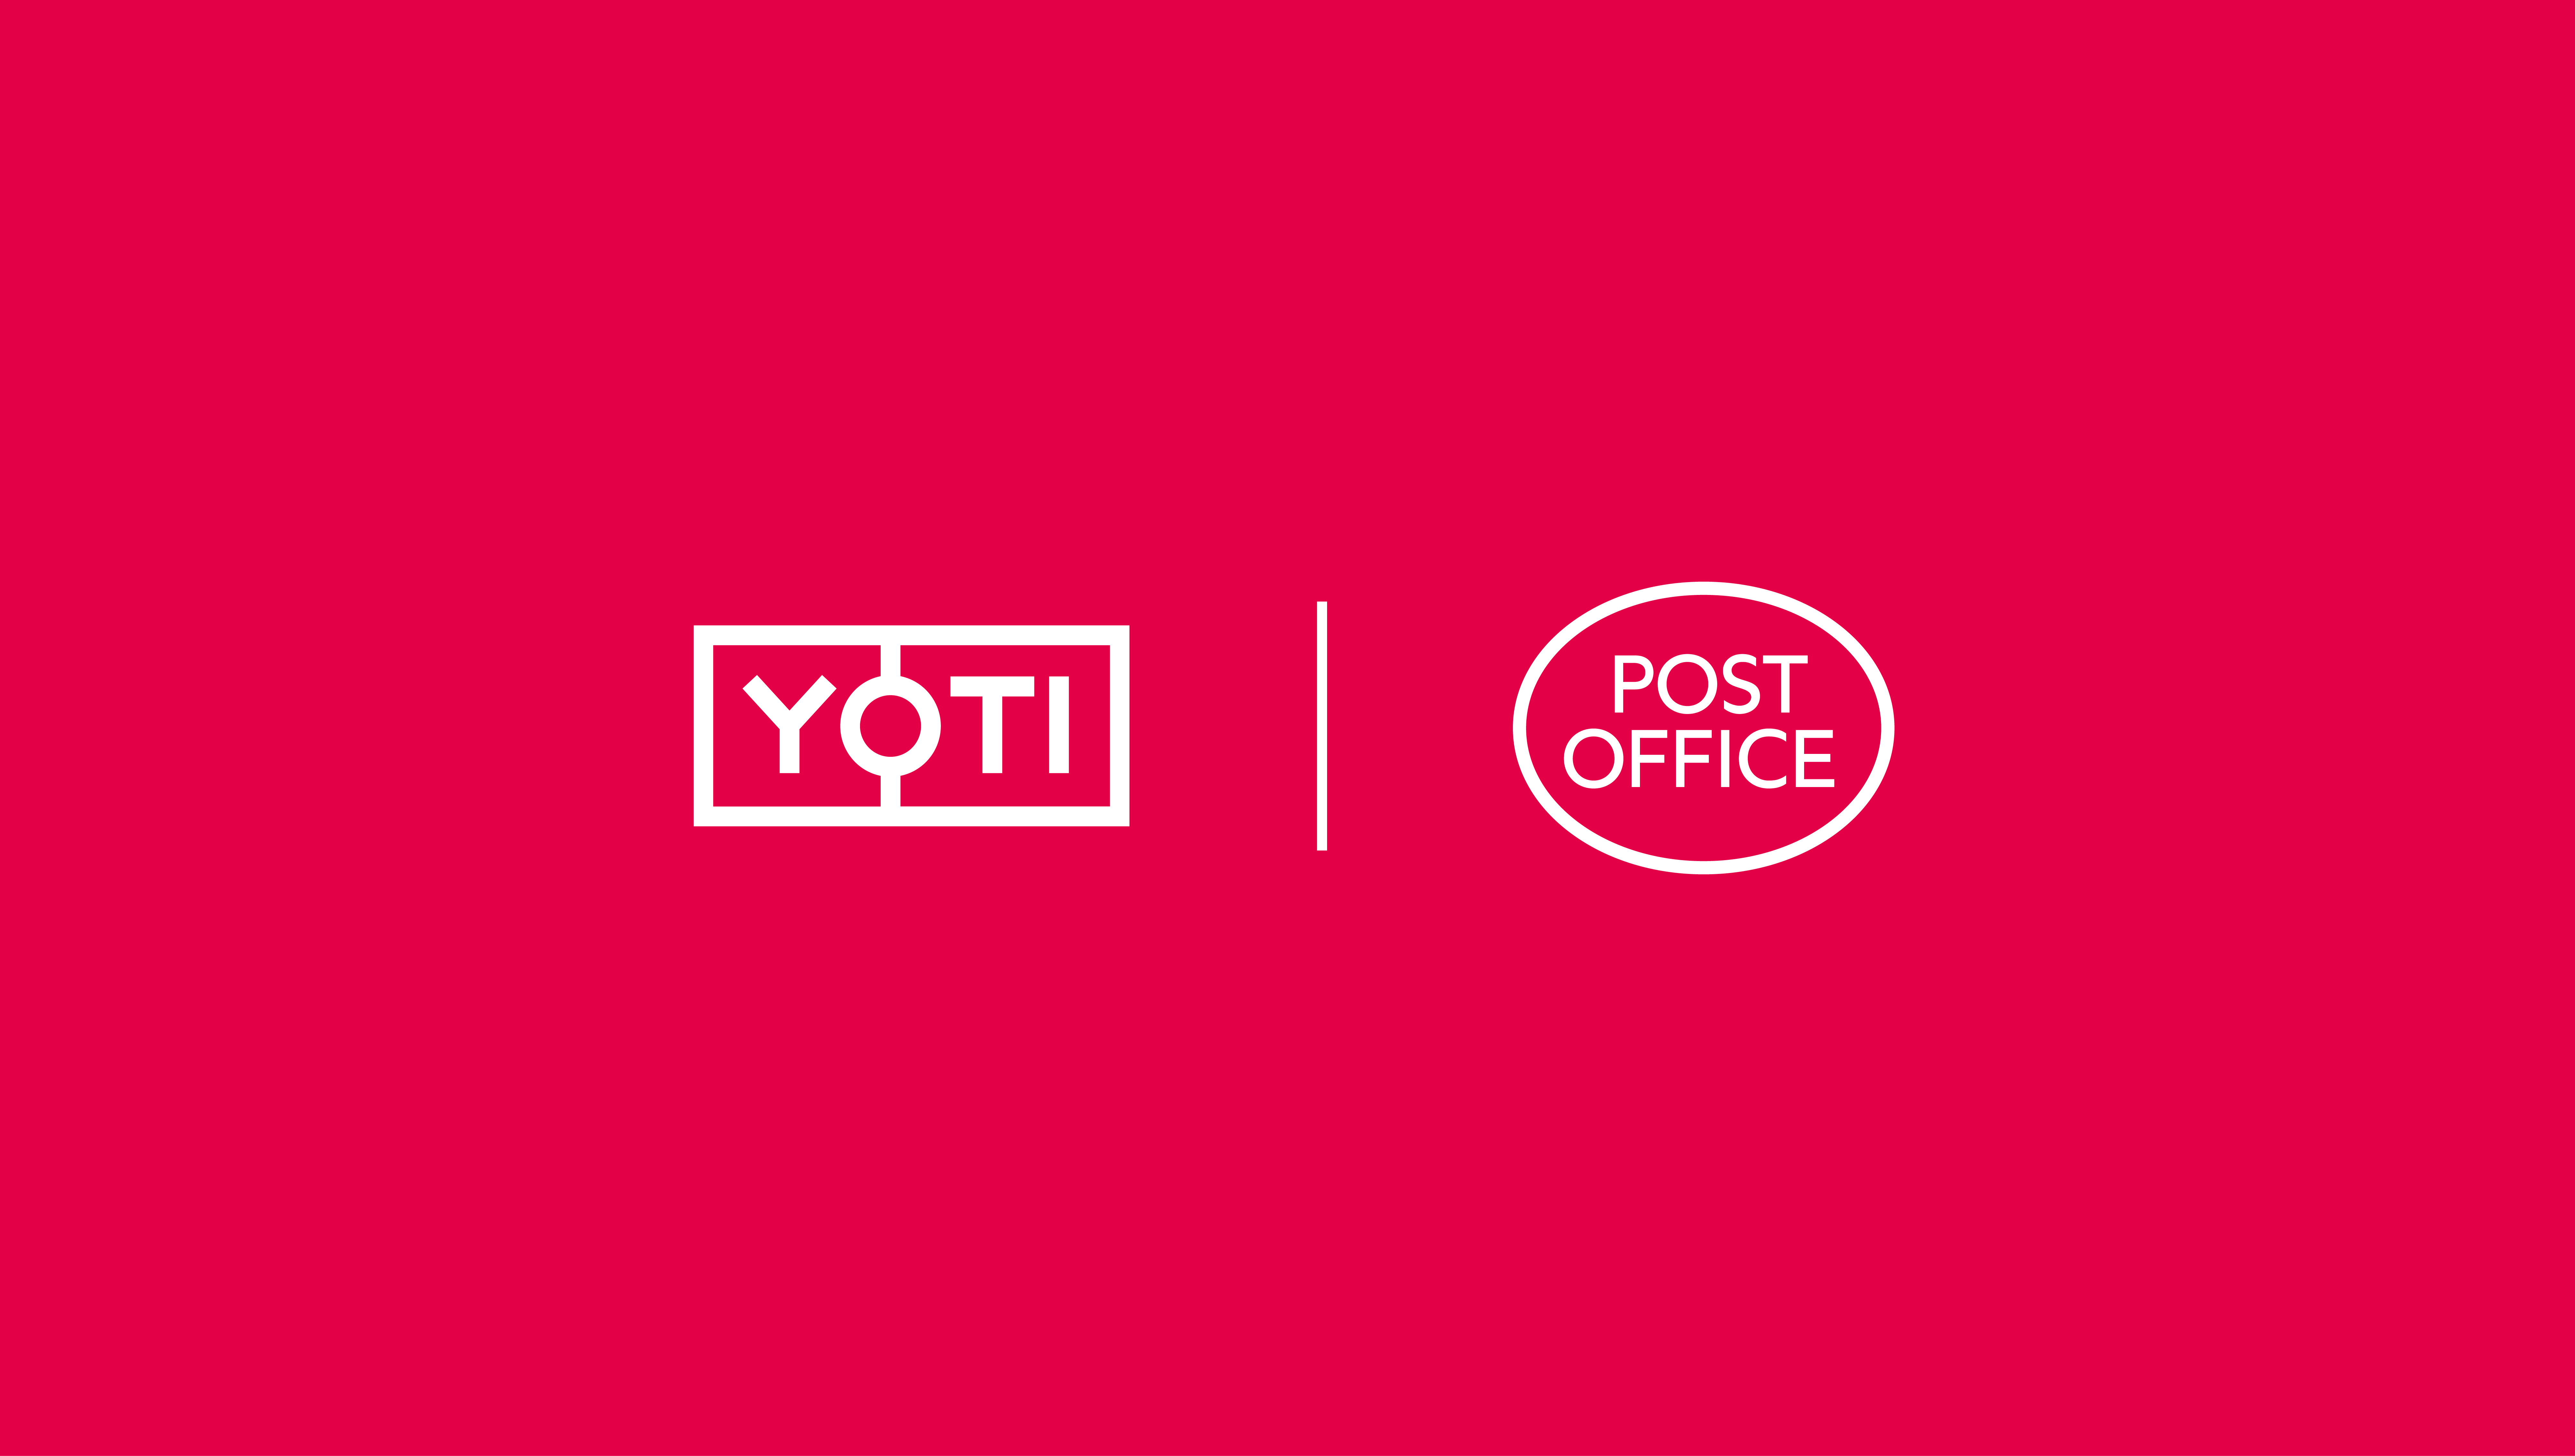 uCheck launches digital identity checks with Yoti and the Post Office